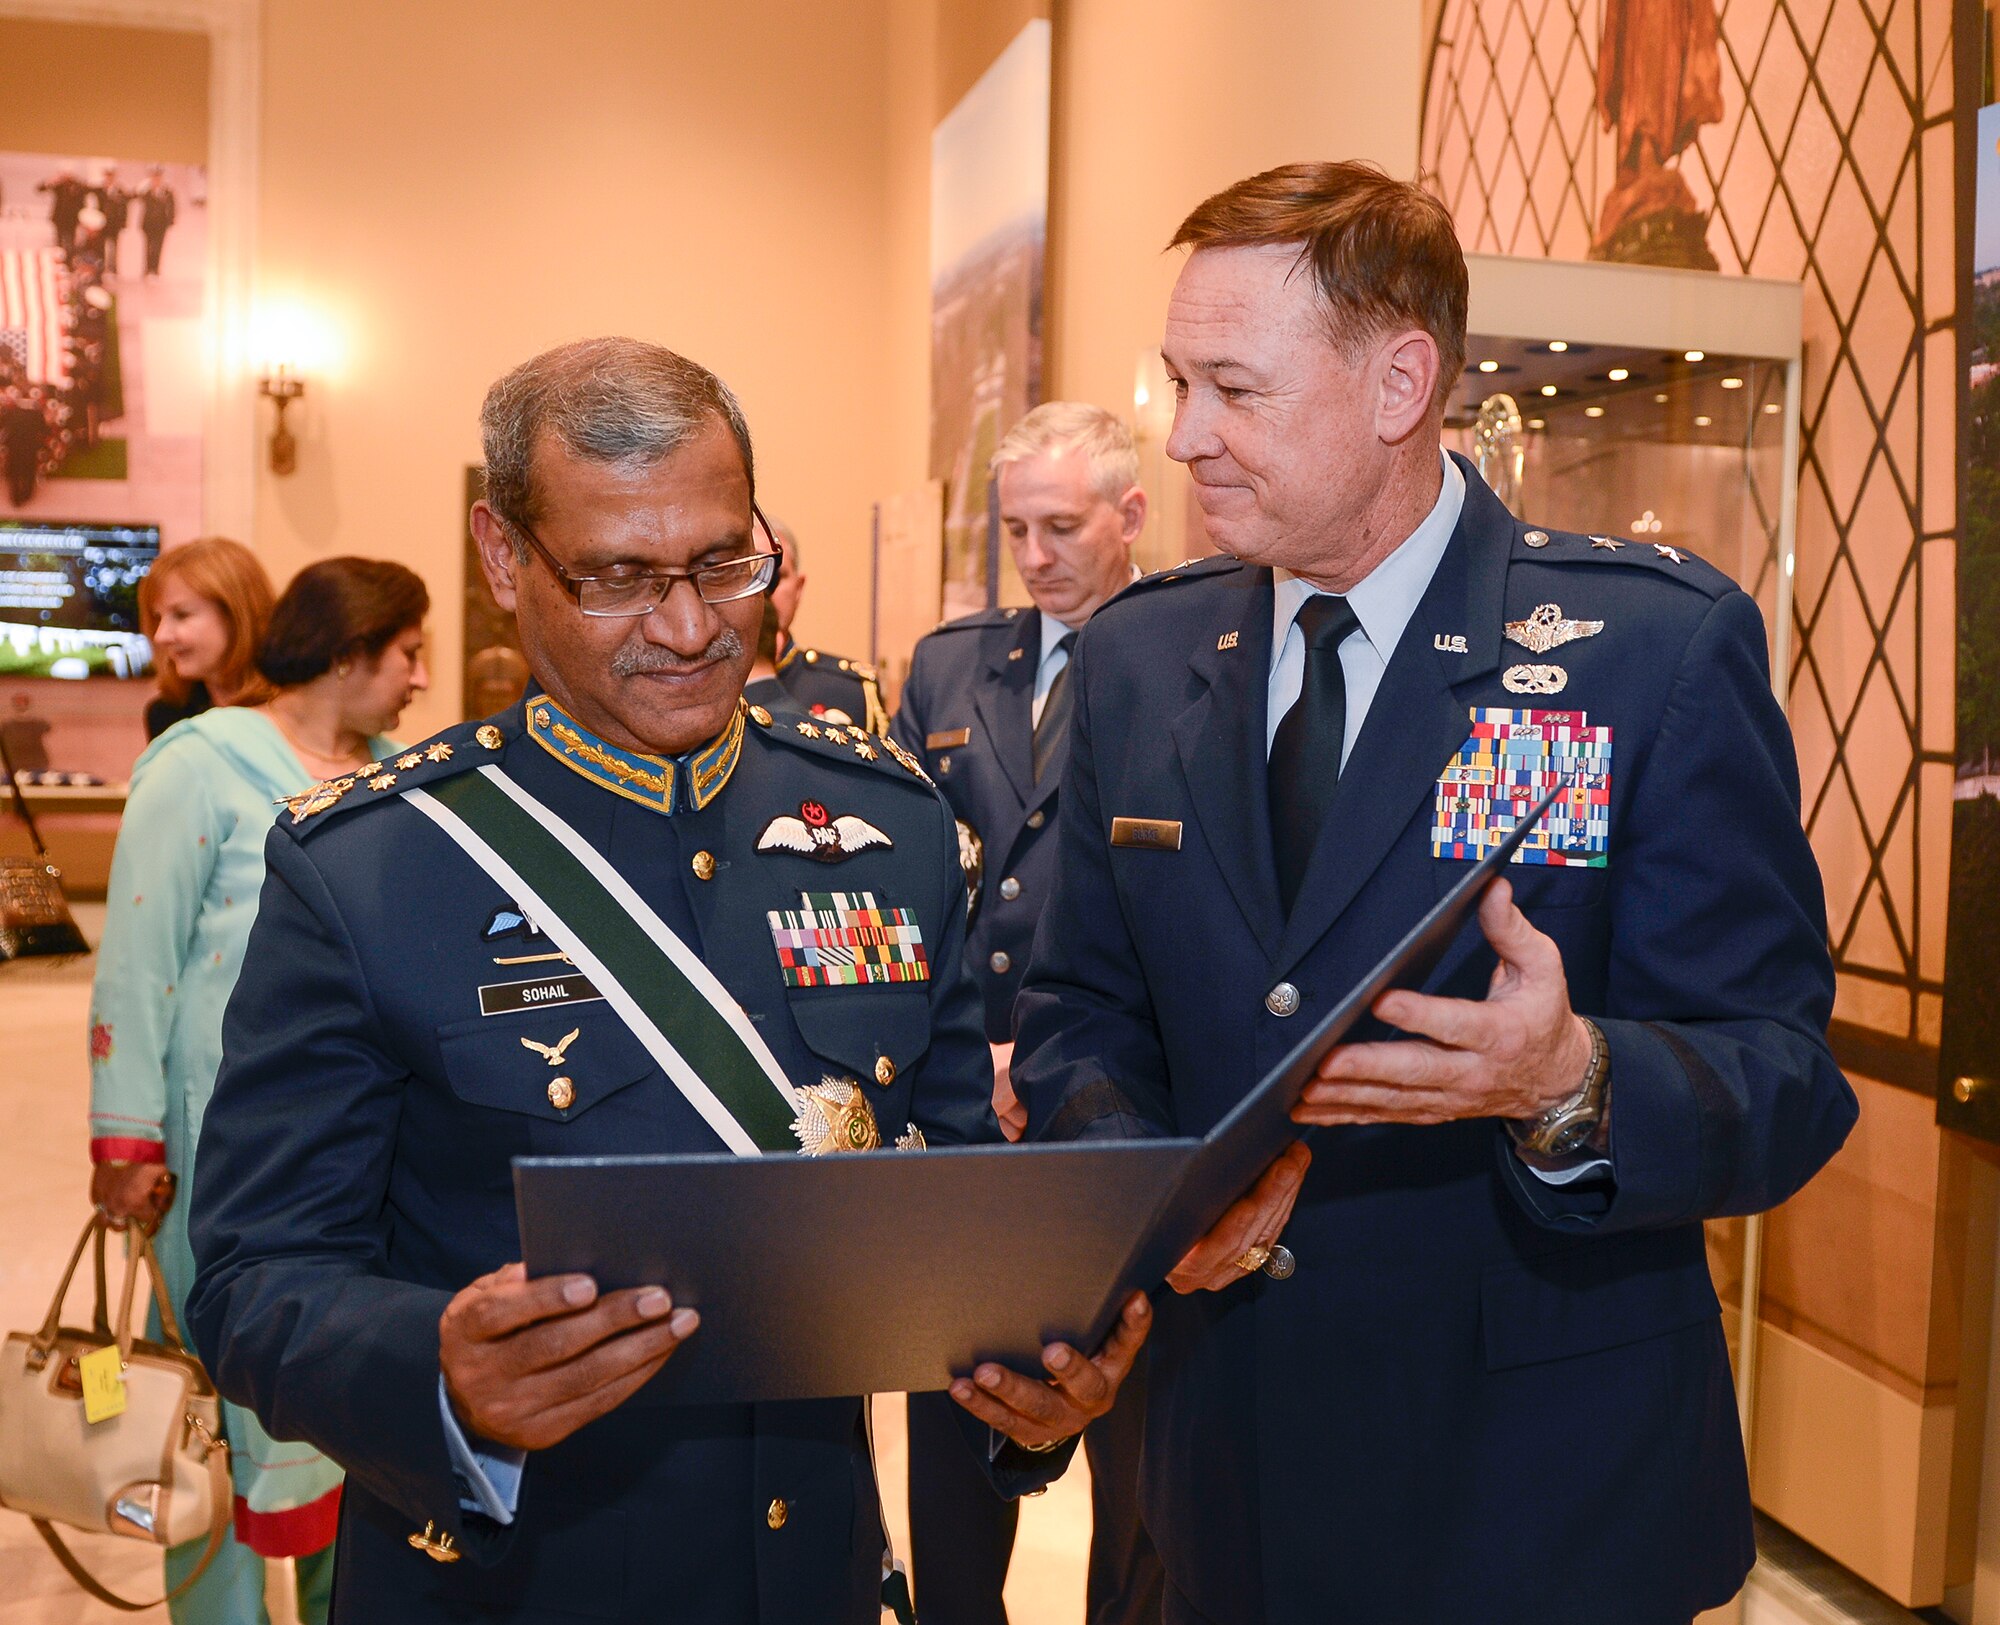 Air Chief Marshal Sohail Aman, Chief of Air Staff of the Pakistan Air Force, is presented a memento by Air Force District of Washington Commander Maj. Gen. Darryl Burke while visiting the Tomb of the Unknown Soldier for a wreath laying ceremony at Arlington National Cemetery on Oct. 6, 2015. Distinguished visitors commonly pay formal respects to the sacrifice of America's veterans in foreign wars by placing a wreath before the Tomb. The Air Force District of Washington brings air, space and cyberspace capabilities to the joint team protecting the nation's capital, and supports local personnel and those serving worldwide. (Photo/ Andy Morataya)